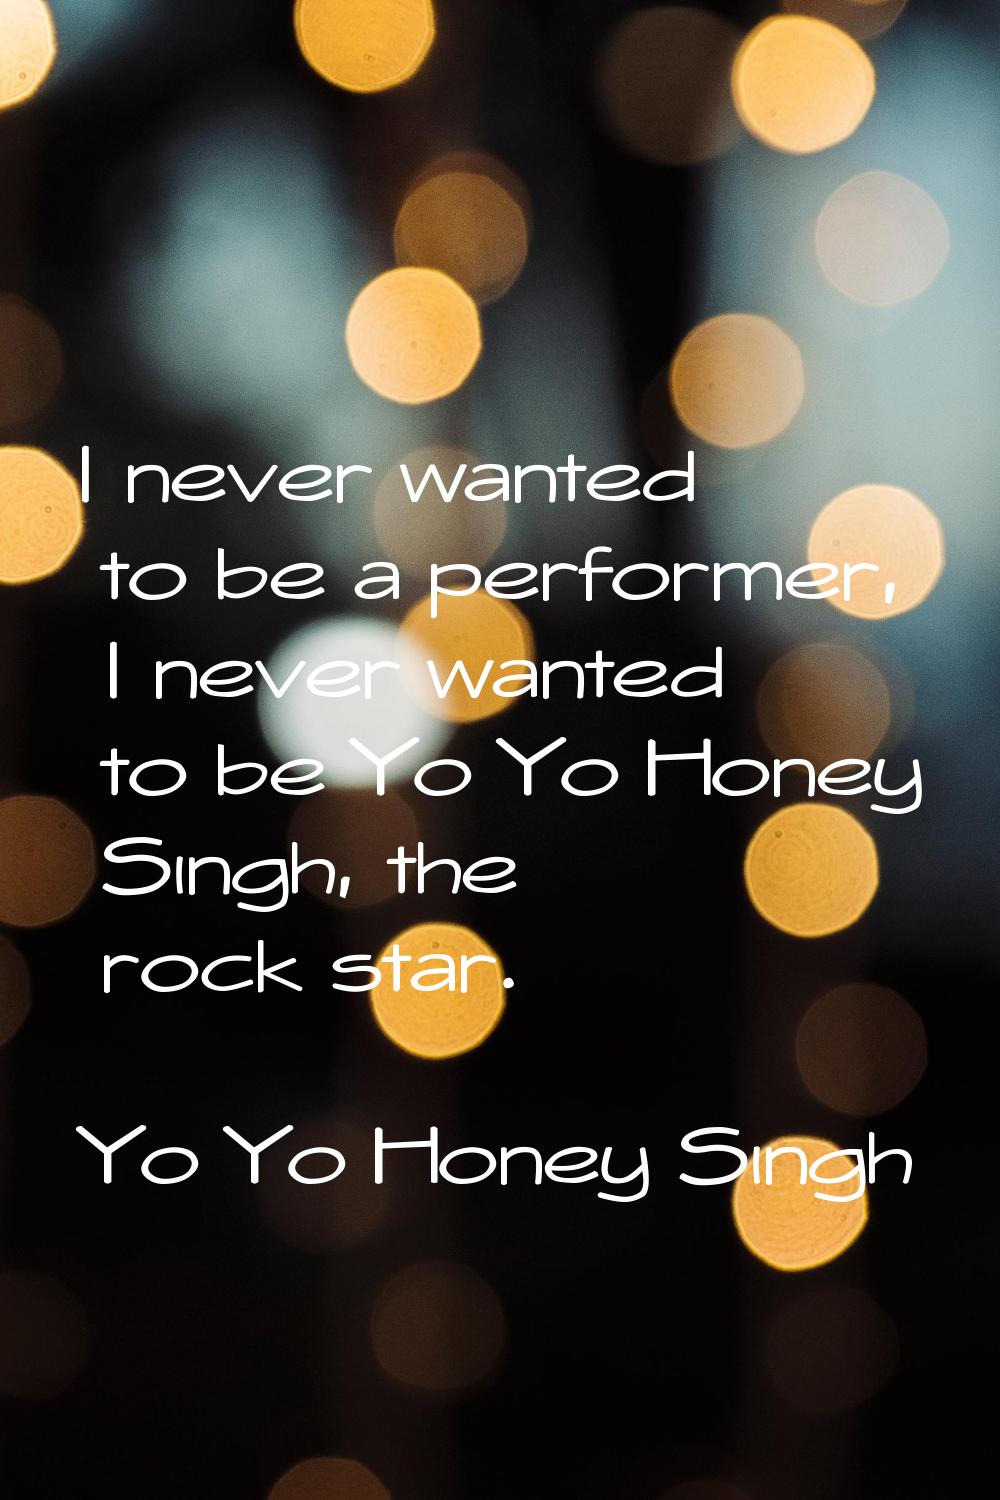 I never wanted to be a performer, I never wanted to be Yo Yo Honey Singh, the rock star.